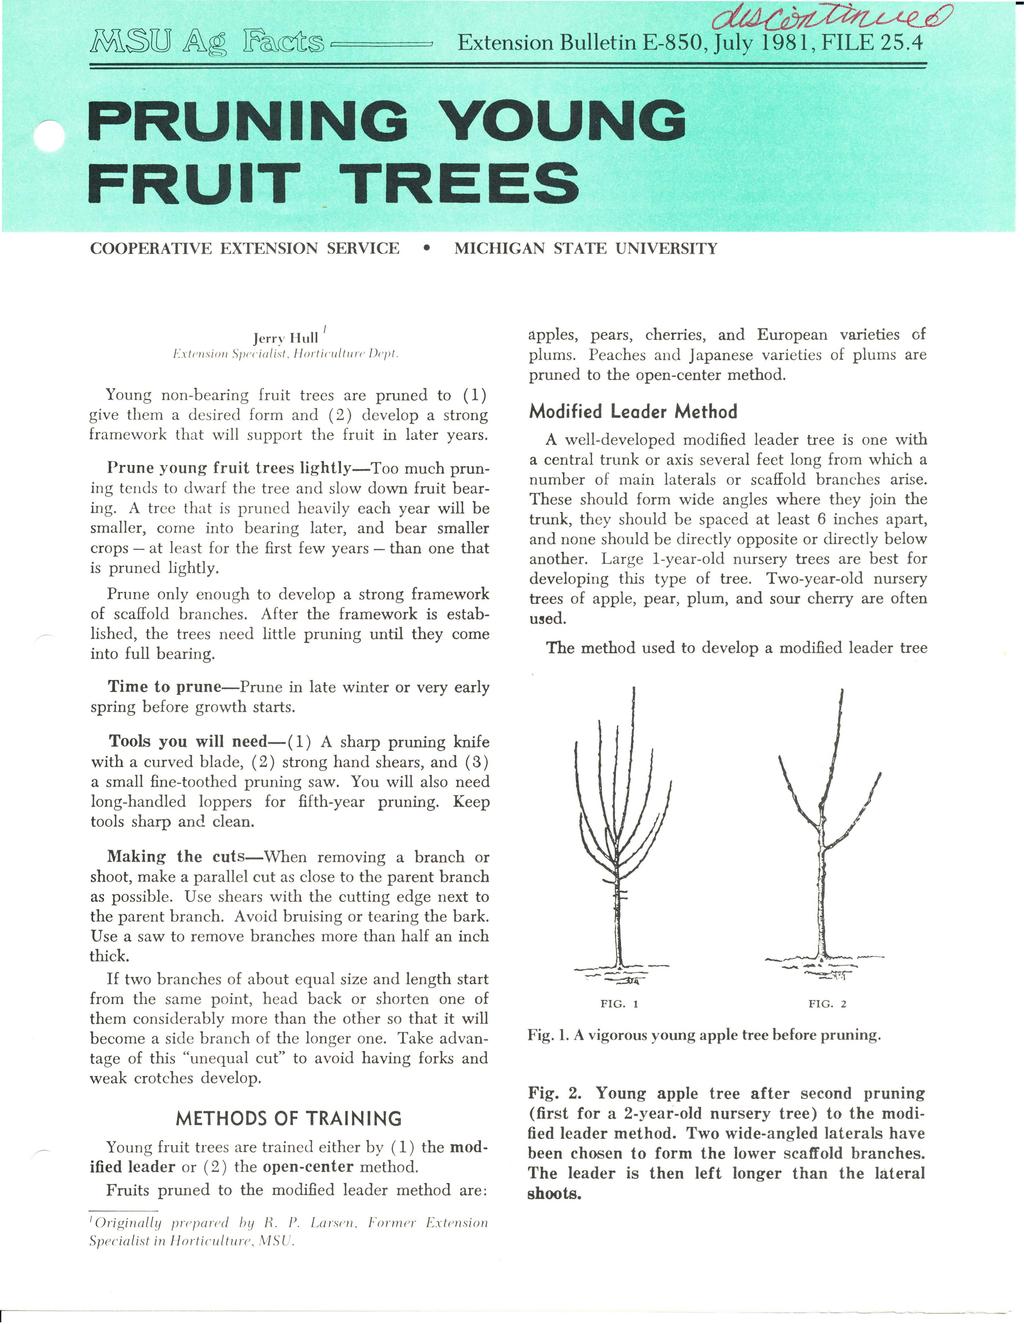 ~~1f) Extension Bulletin E-850, July 1981, FILE 25.4 PRUNING YOUNG FRUIT _ TREES COOPERATIVE EXTENSION SERVICE MICHIGAN STATE UNIVERSITY J Jerry Hull I :x/ell sio ll Sl }('c iulis/.